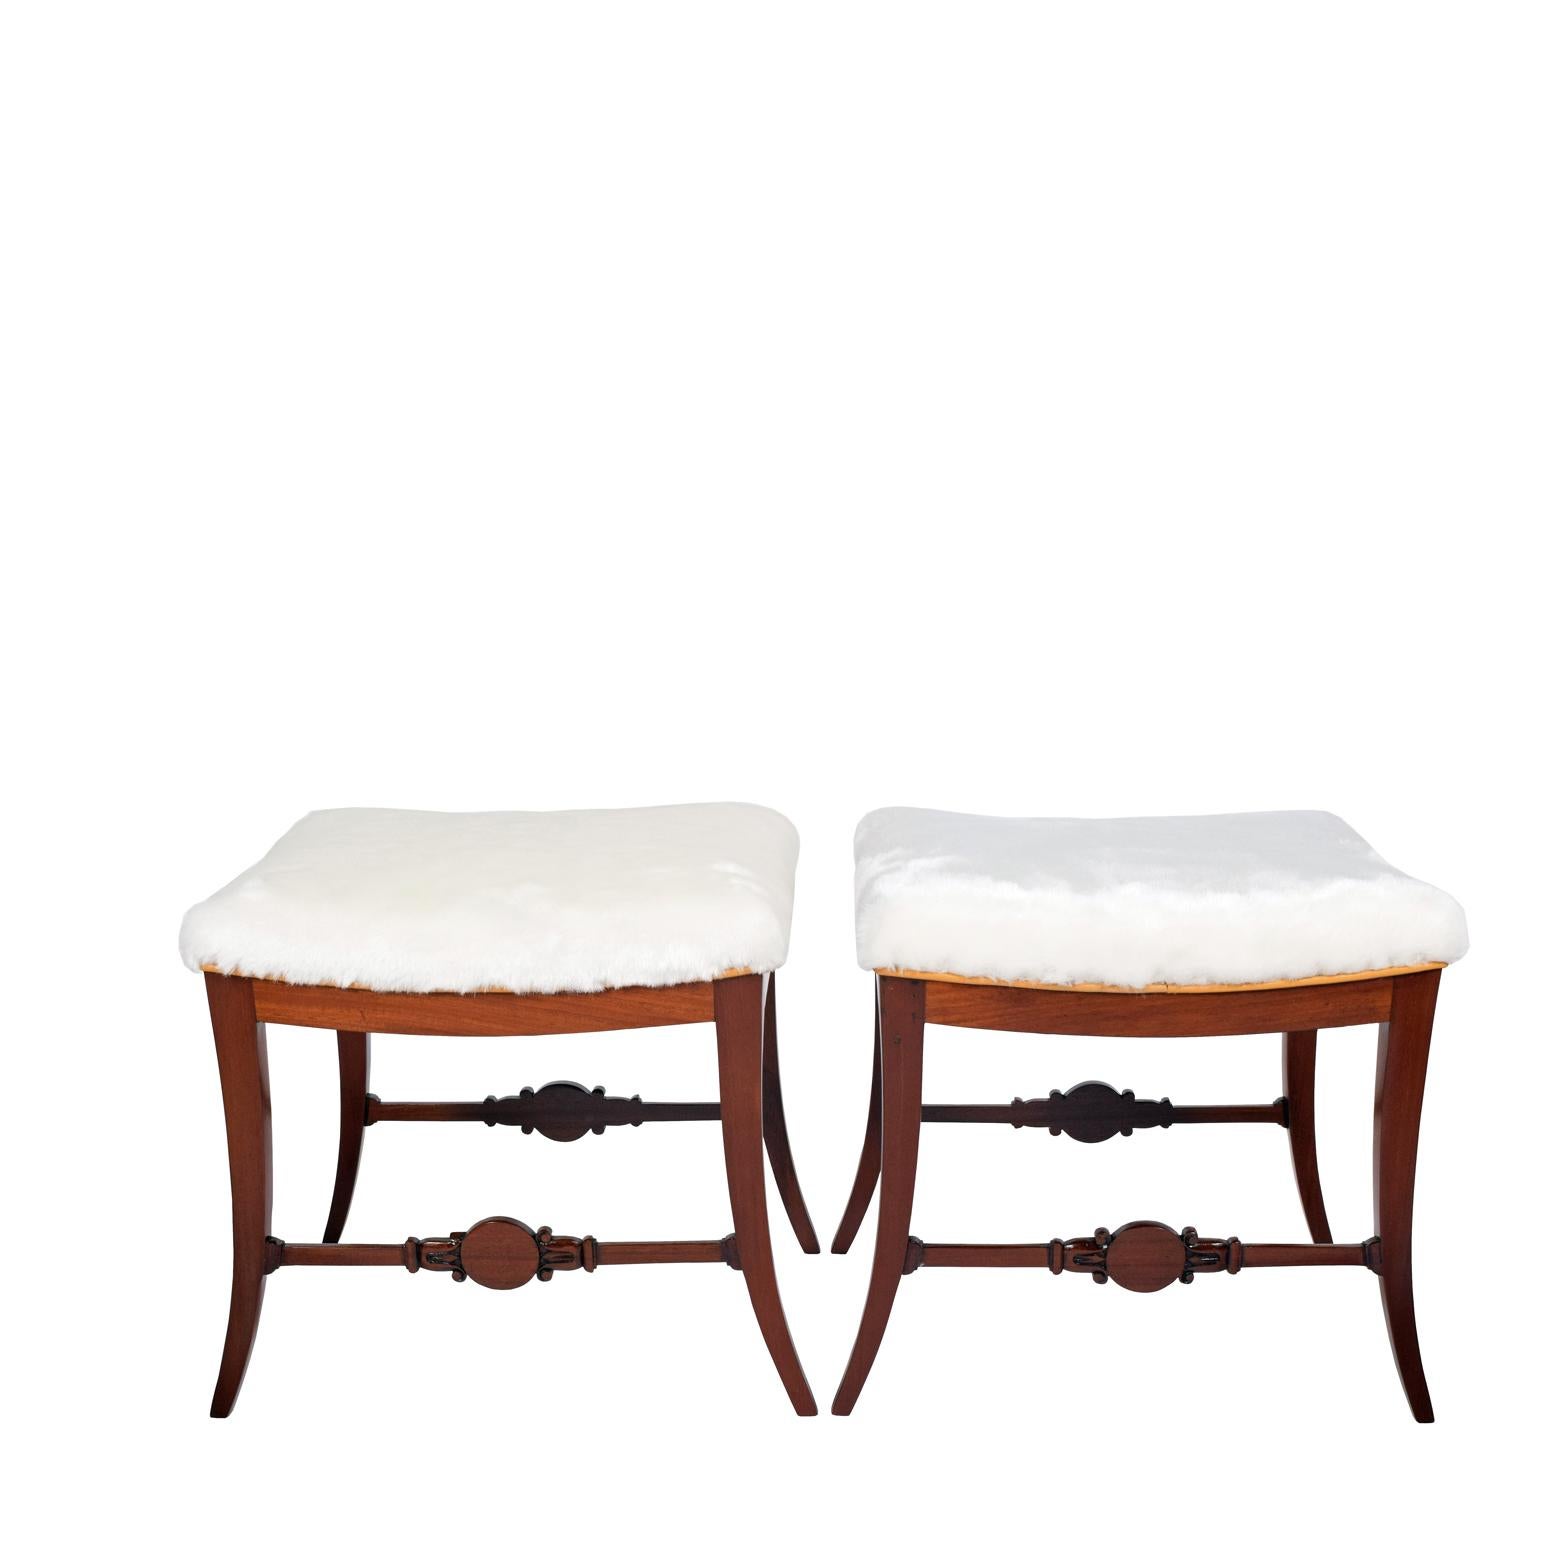 Sold in pairs

 the antique wooden stools upholstered in faux fur with leather raised on sabre legs joined by a cross-stretcher with a carved medallion.Same with old repairs and minor crack to the wood.